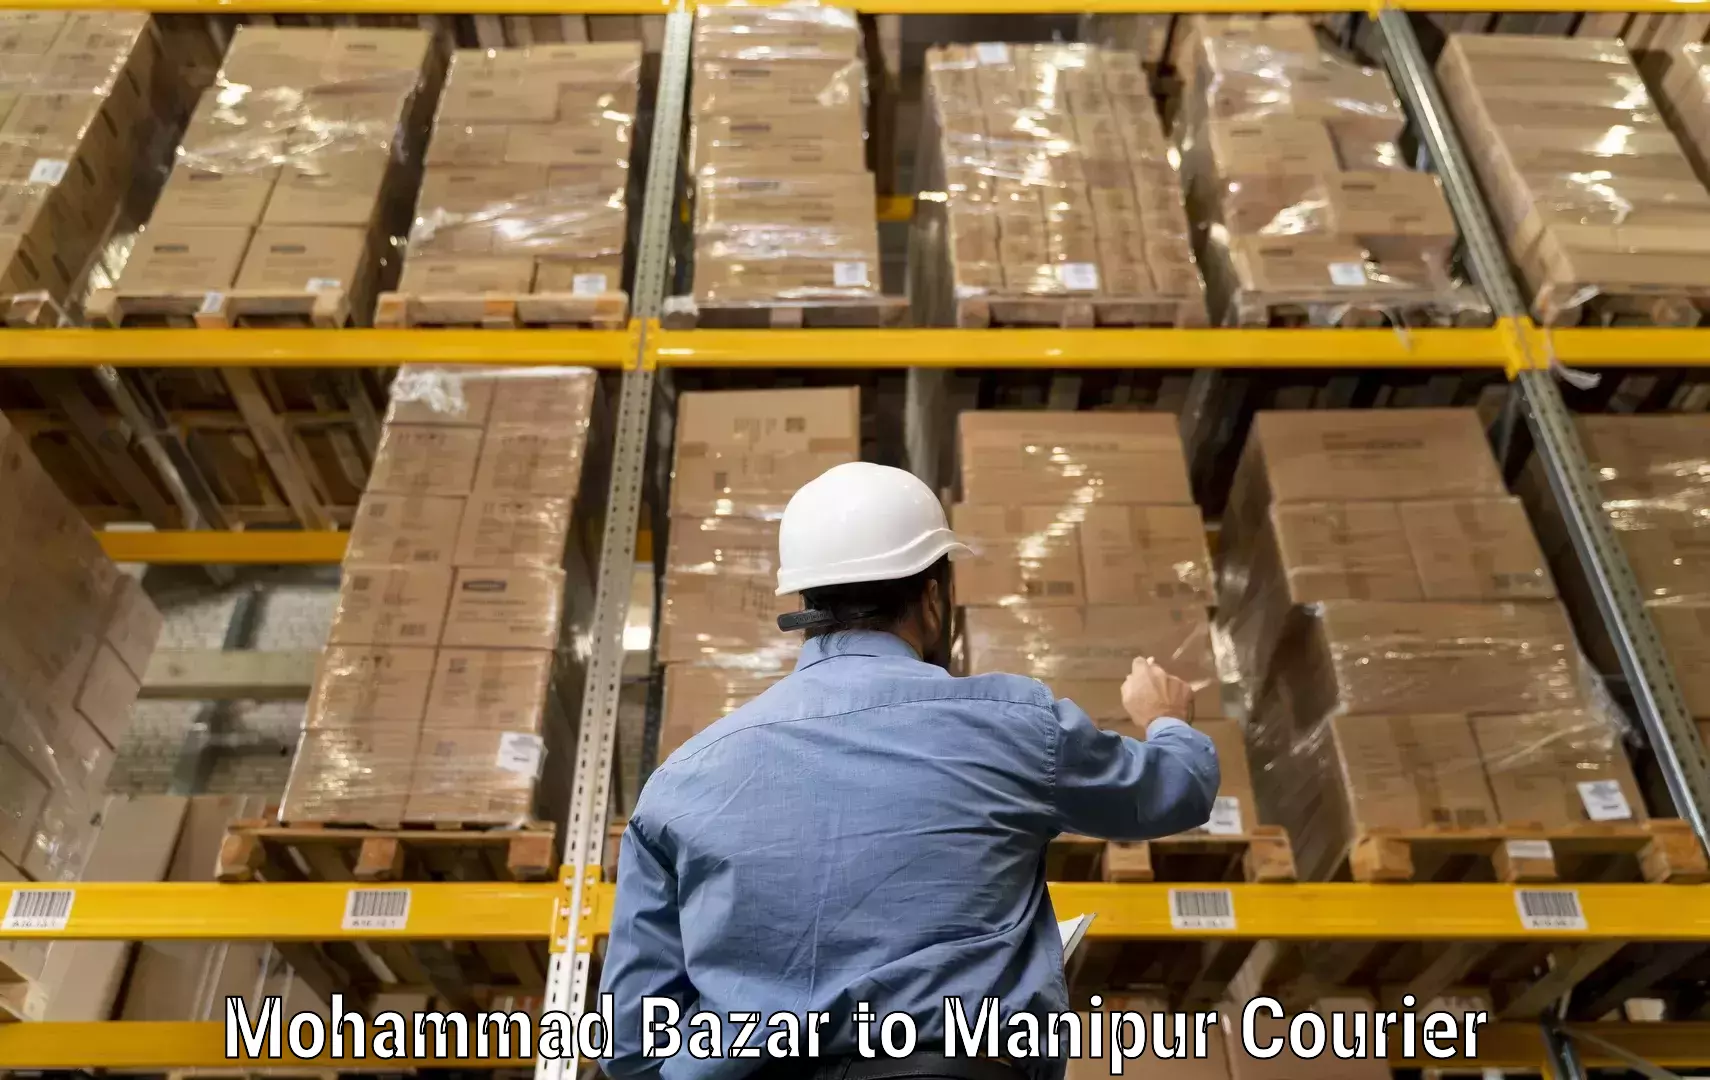 Speedy delivery service Mohammad Bazar to Manipur